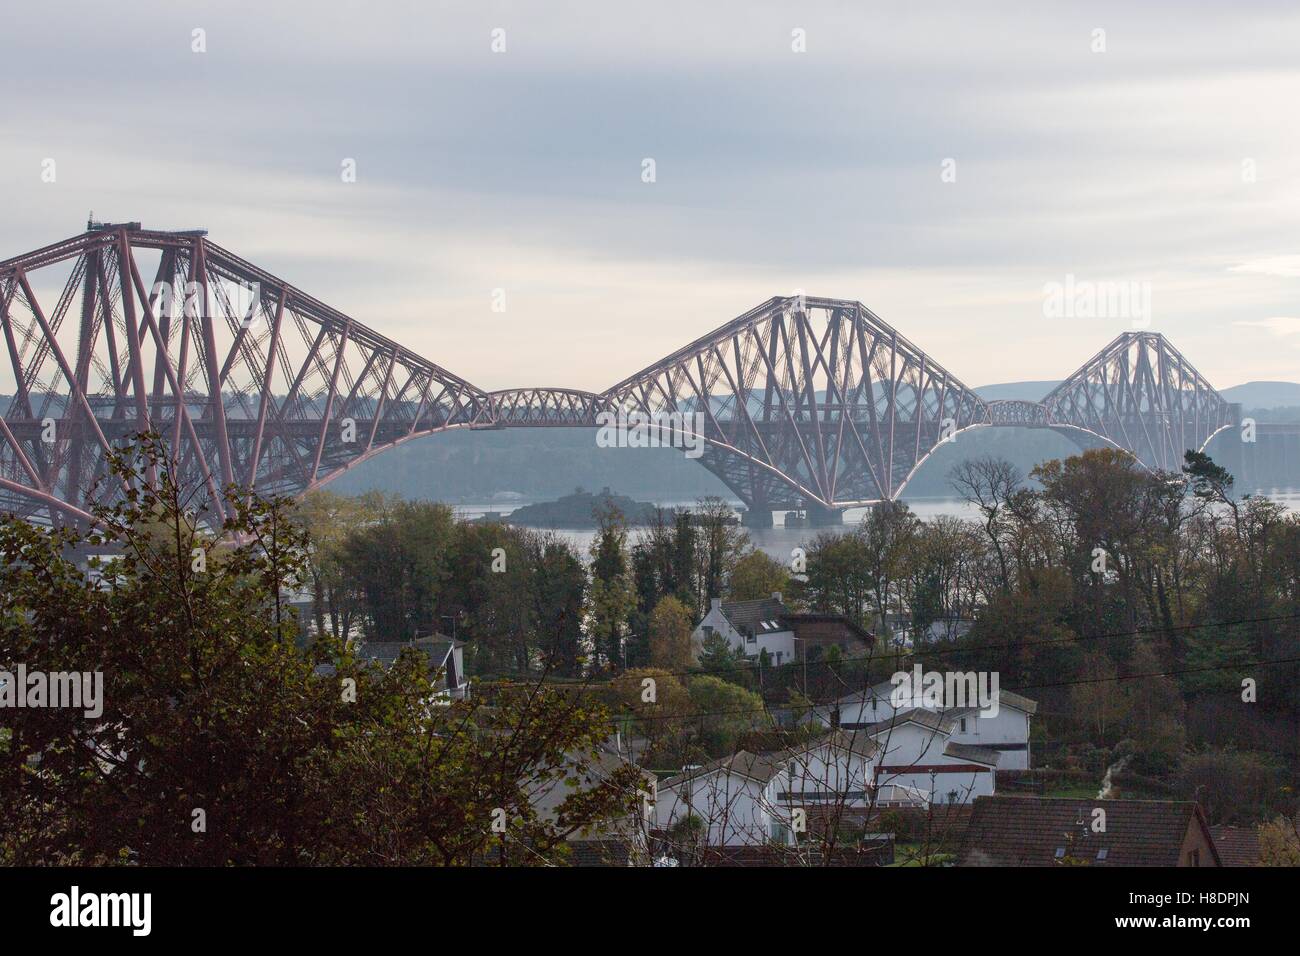 Queensferry, Edinburgh, Scotland, 11th, November, 2016. The Railway Bridge, which still carries both Passengers and Freight.  Photo is taken looking southward from North Queensferry.  Phil Hutchinson/Alamy Live News Stock Photo